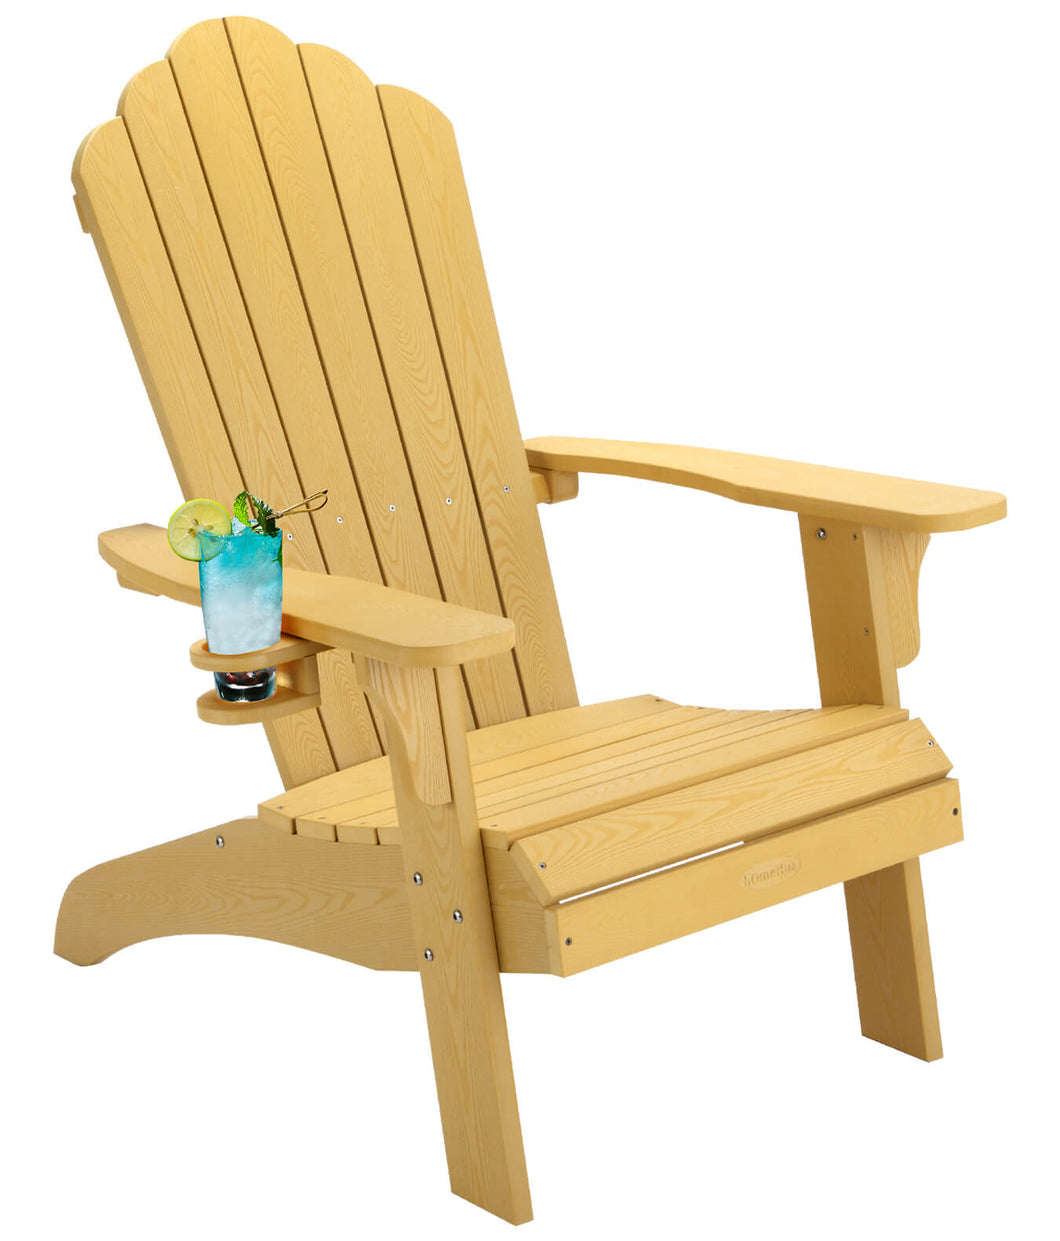 Oversized Adirondack Chair Weather Resistant with Cup Holder - Yellow